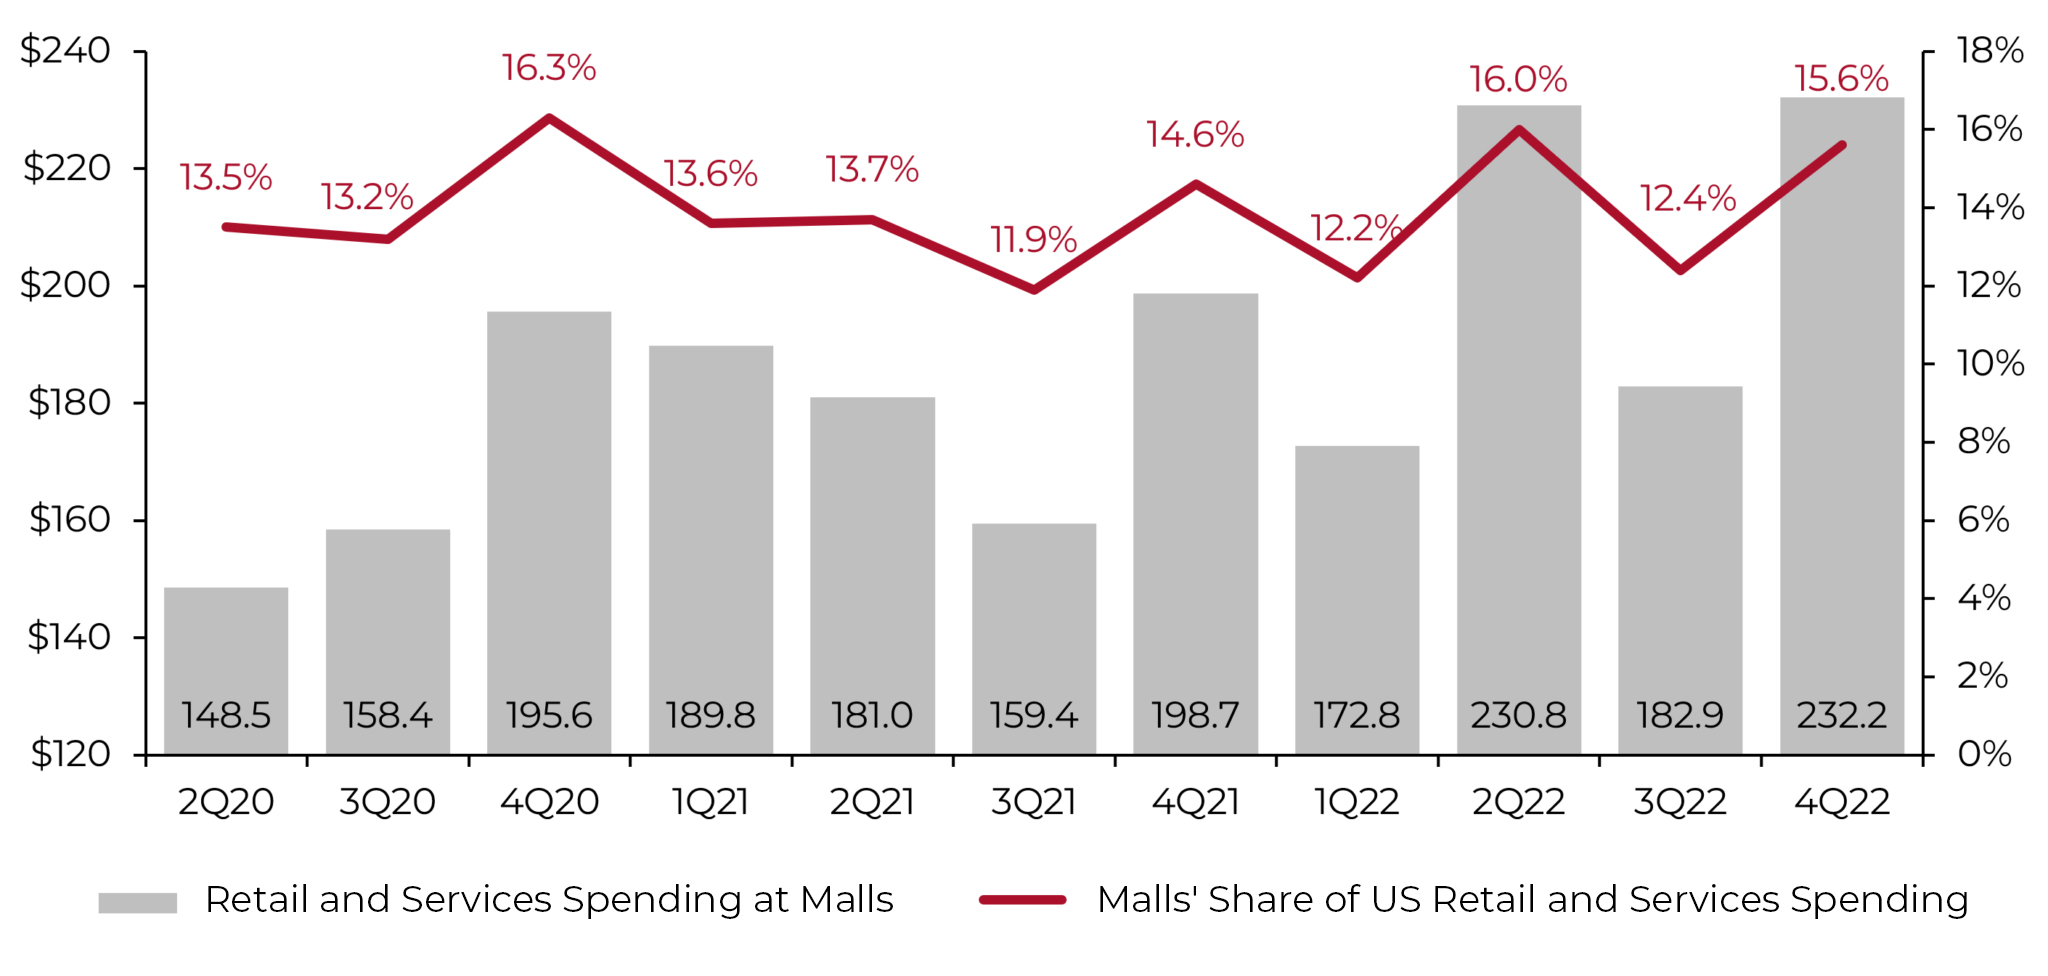 Copley Place Mall: Is This High-End Luxury Mall on the Decline